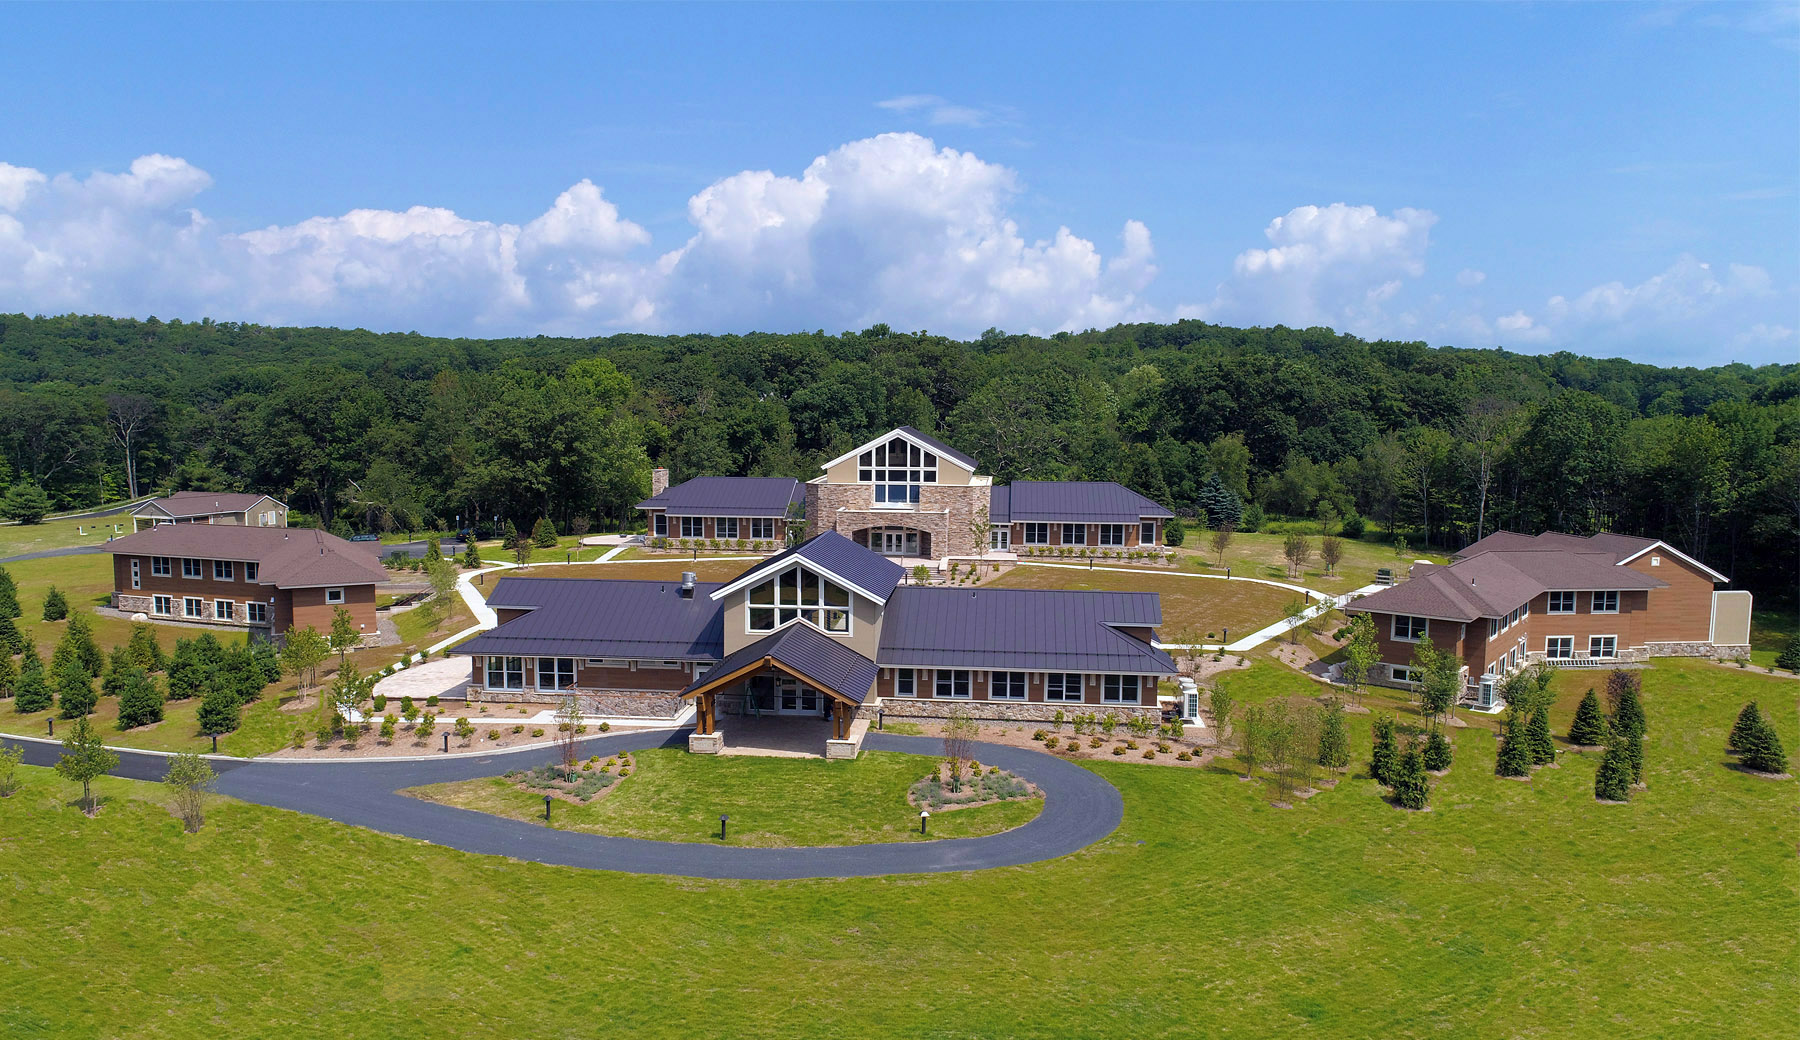 An aerial view of the Mahamudra Buddhist Hermitage in Pine Bush, New York. The Welcome Center is front and center with the Meditation Hall beyond and Residence buildings flanking either side.